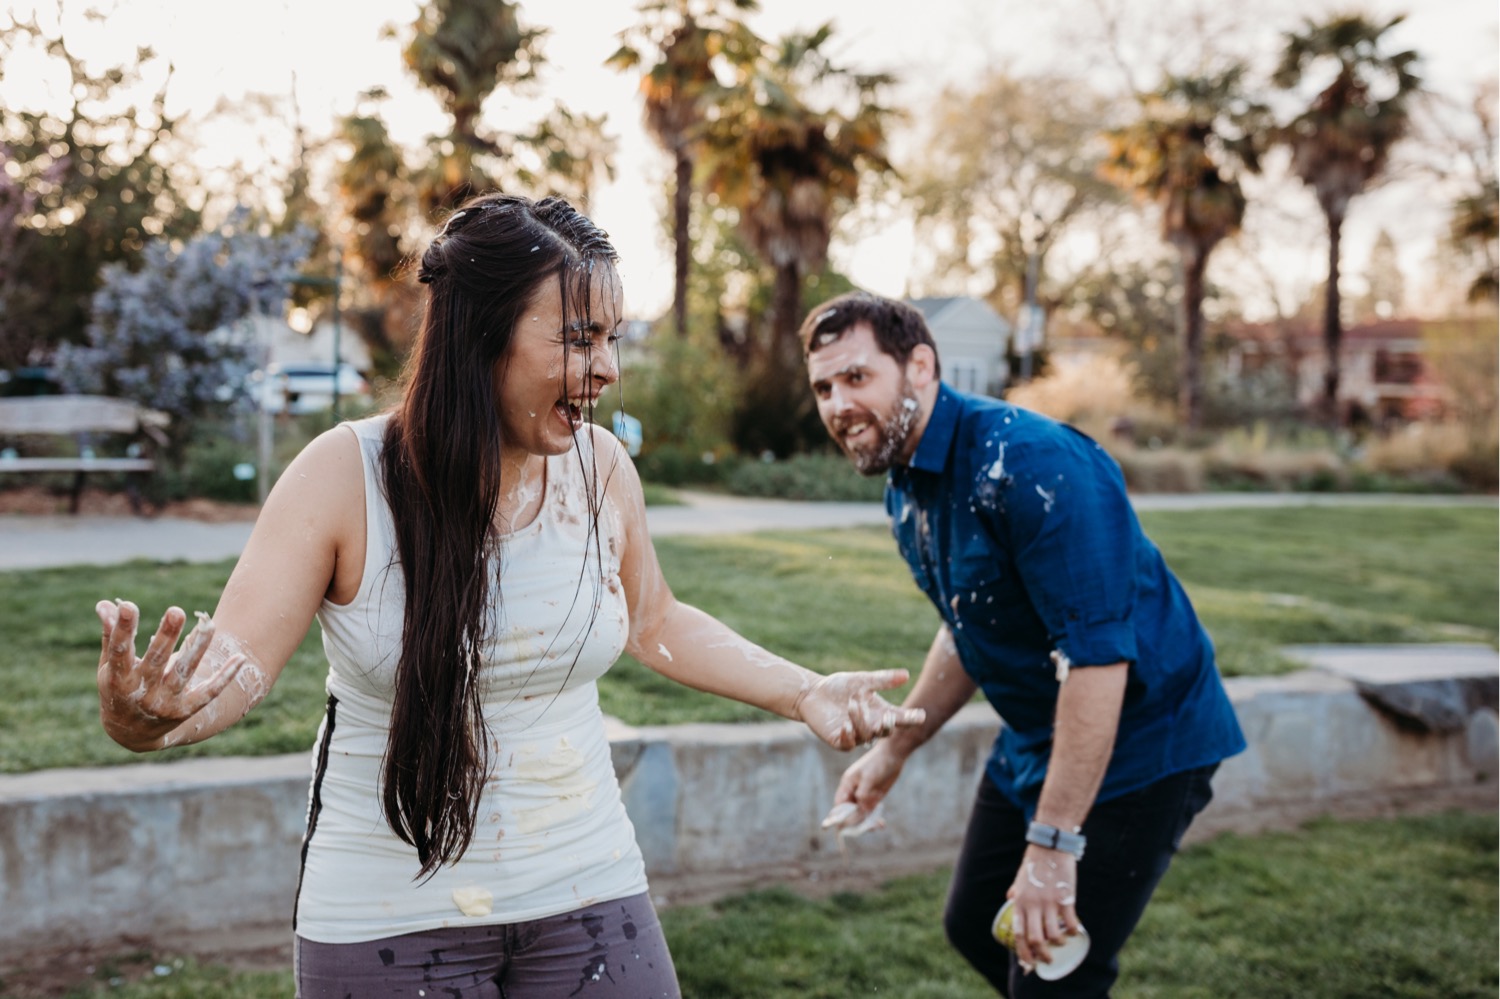 Woman laughs after ice cream food fight with her fiance who is in the background during their Davis engagement photos.